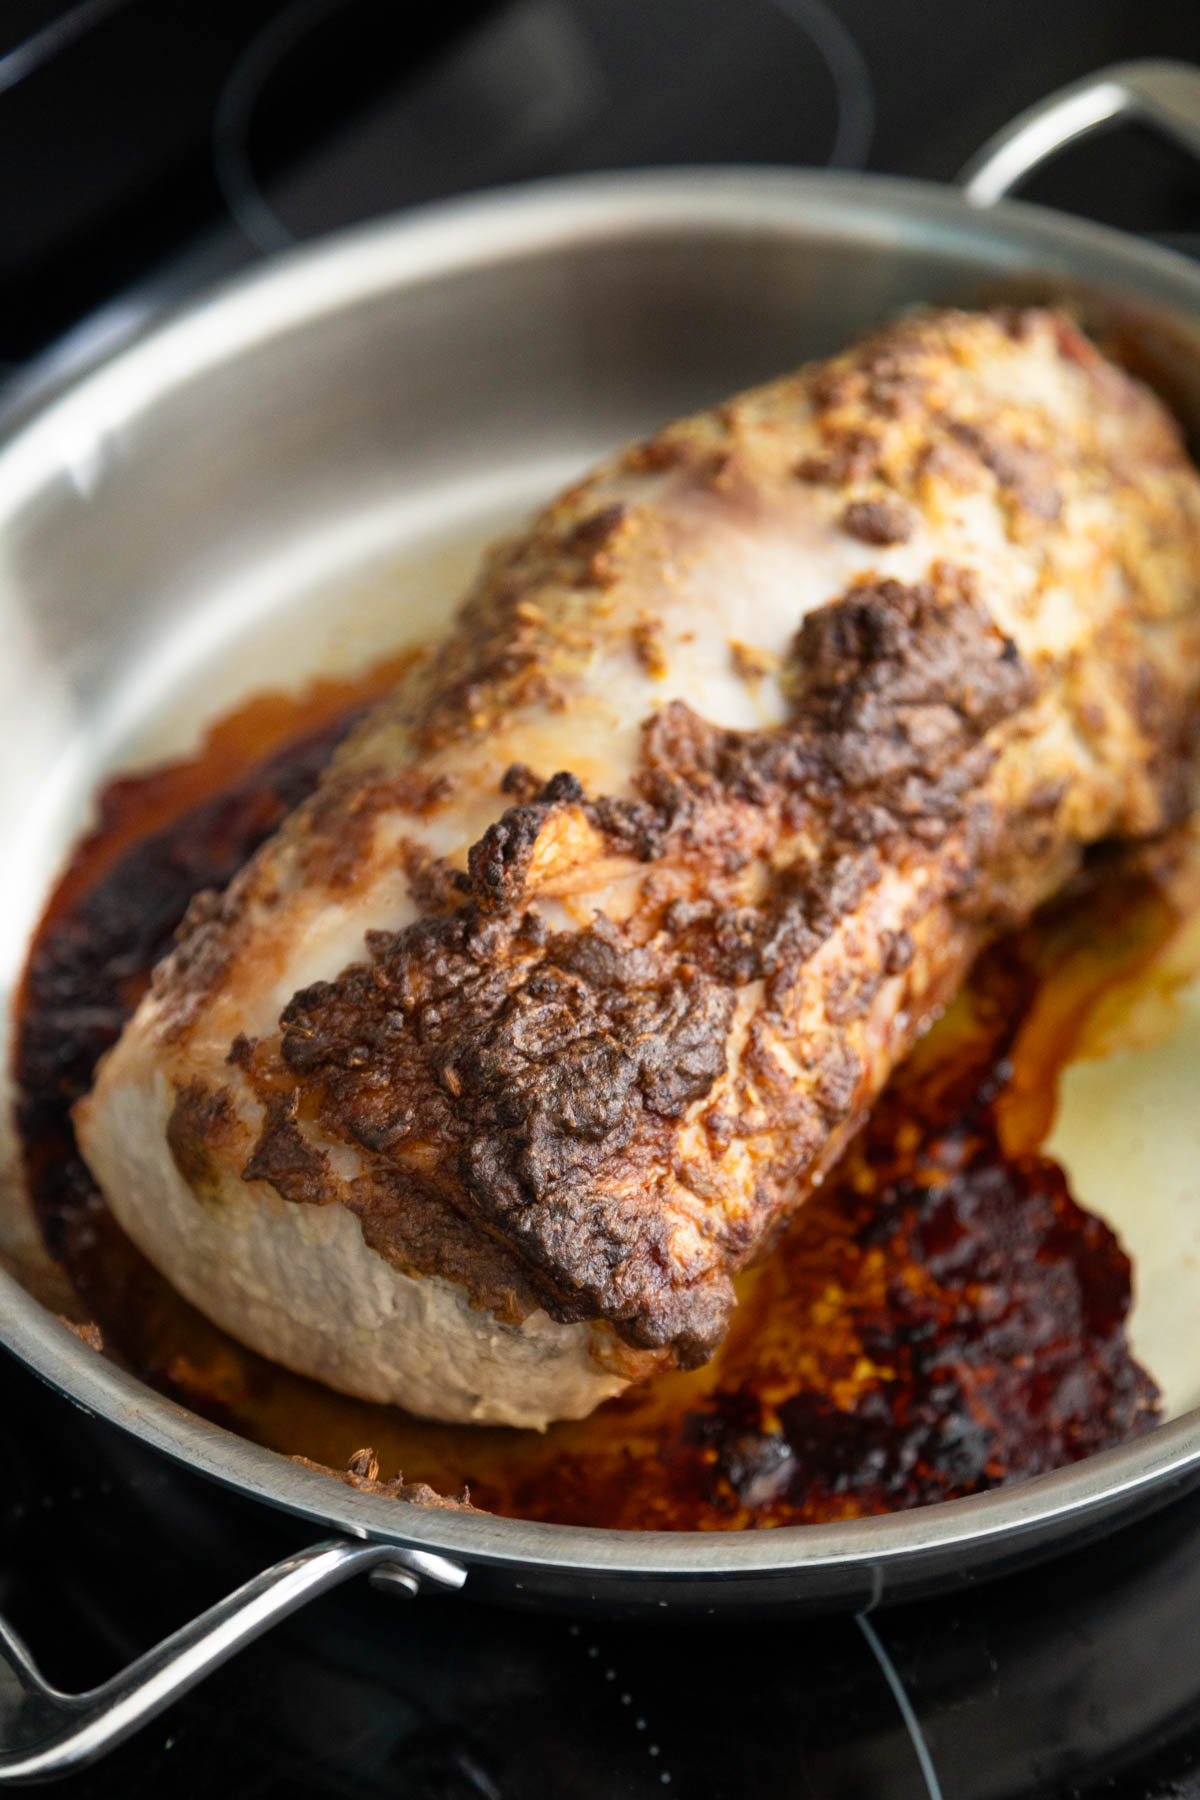 The pork loin has finished roasting and has deep brown crispy edges.